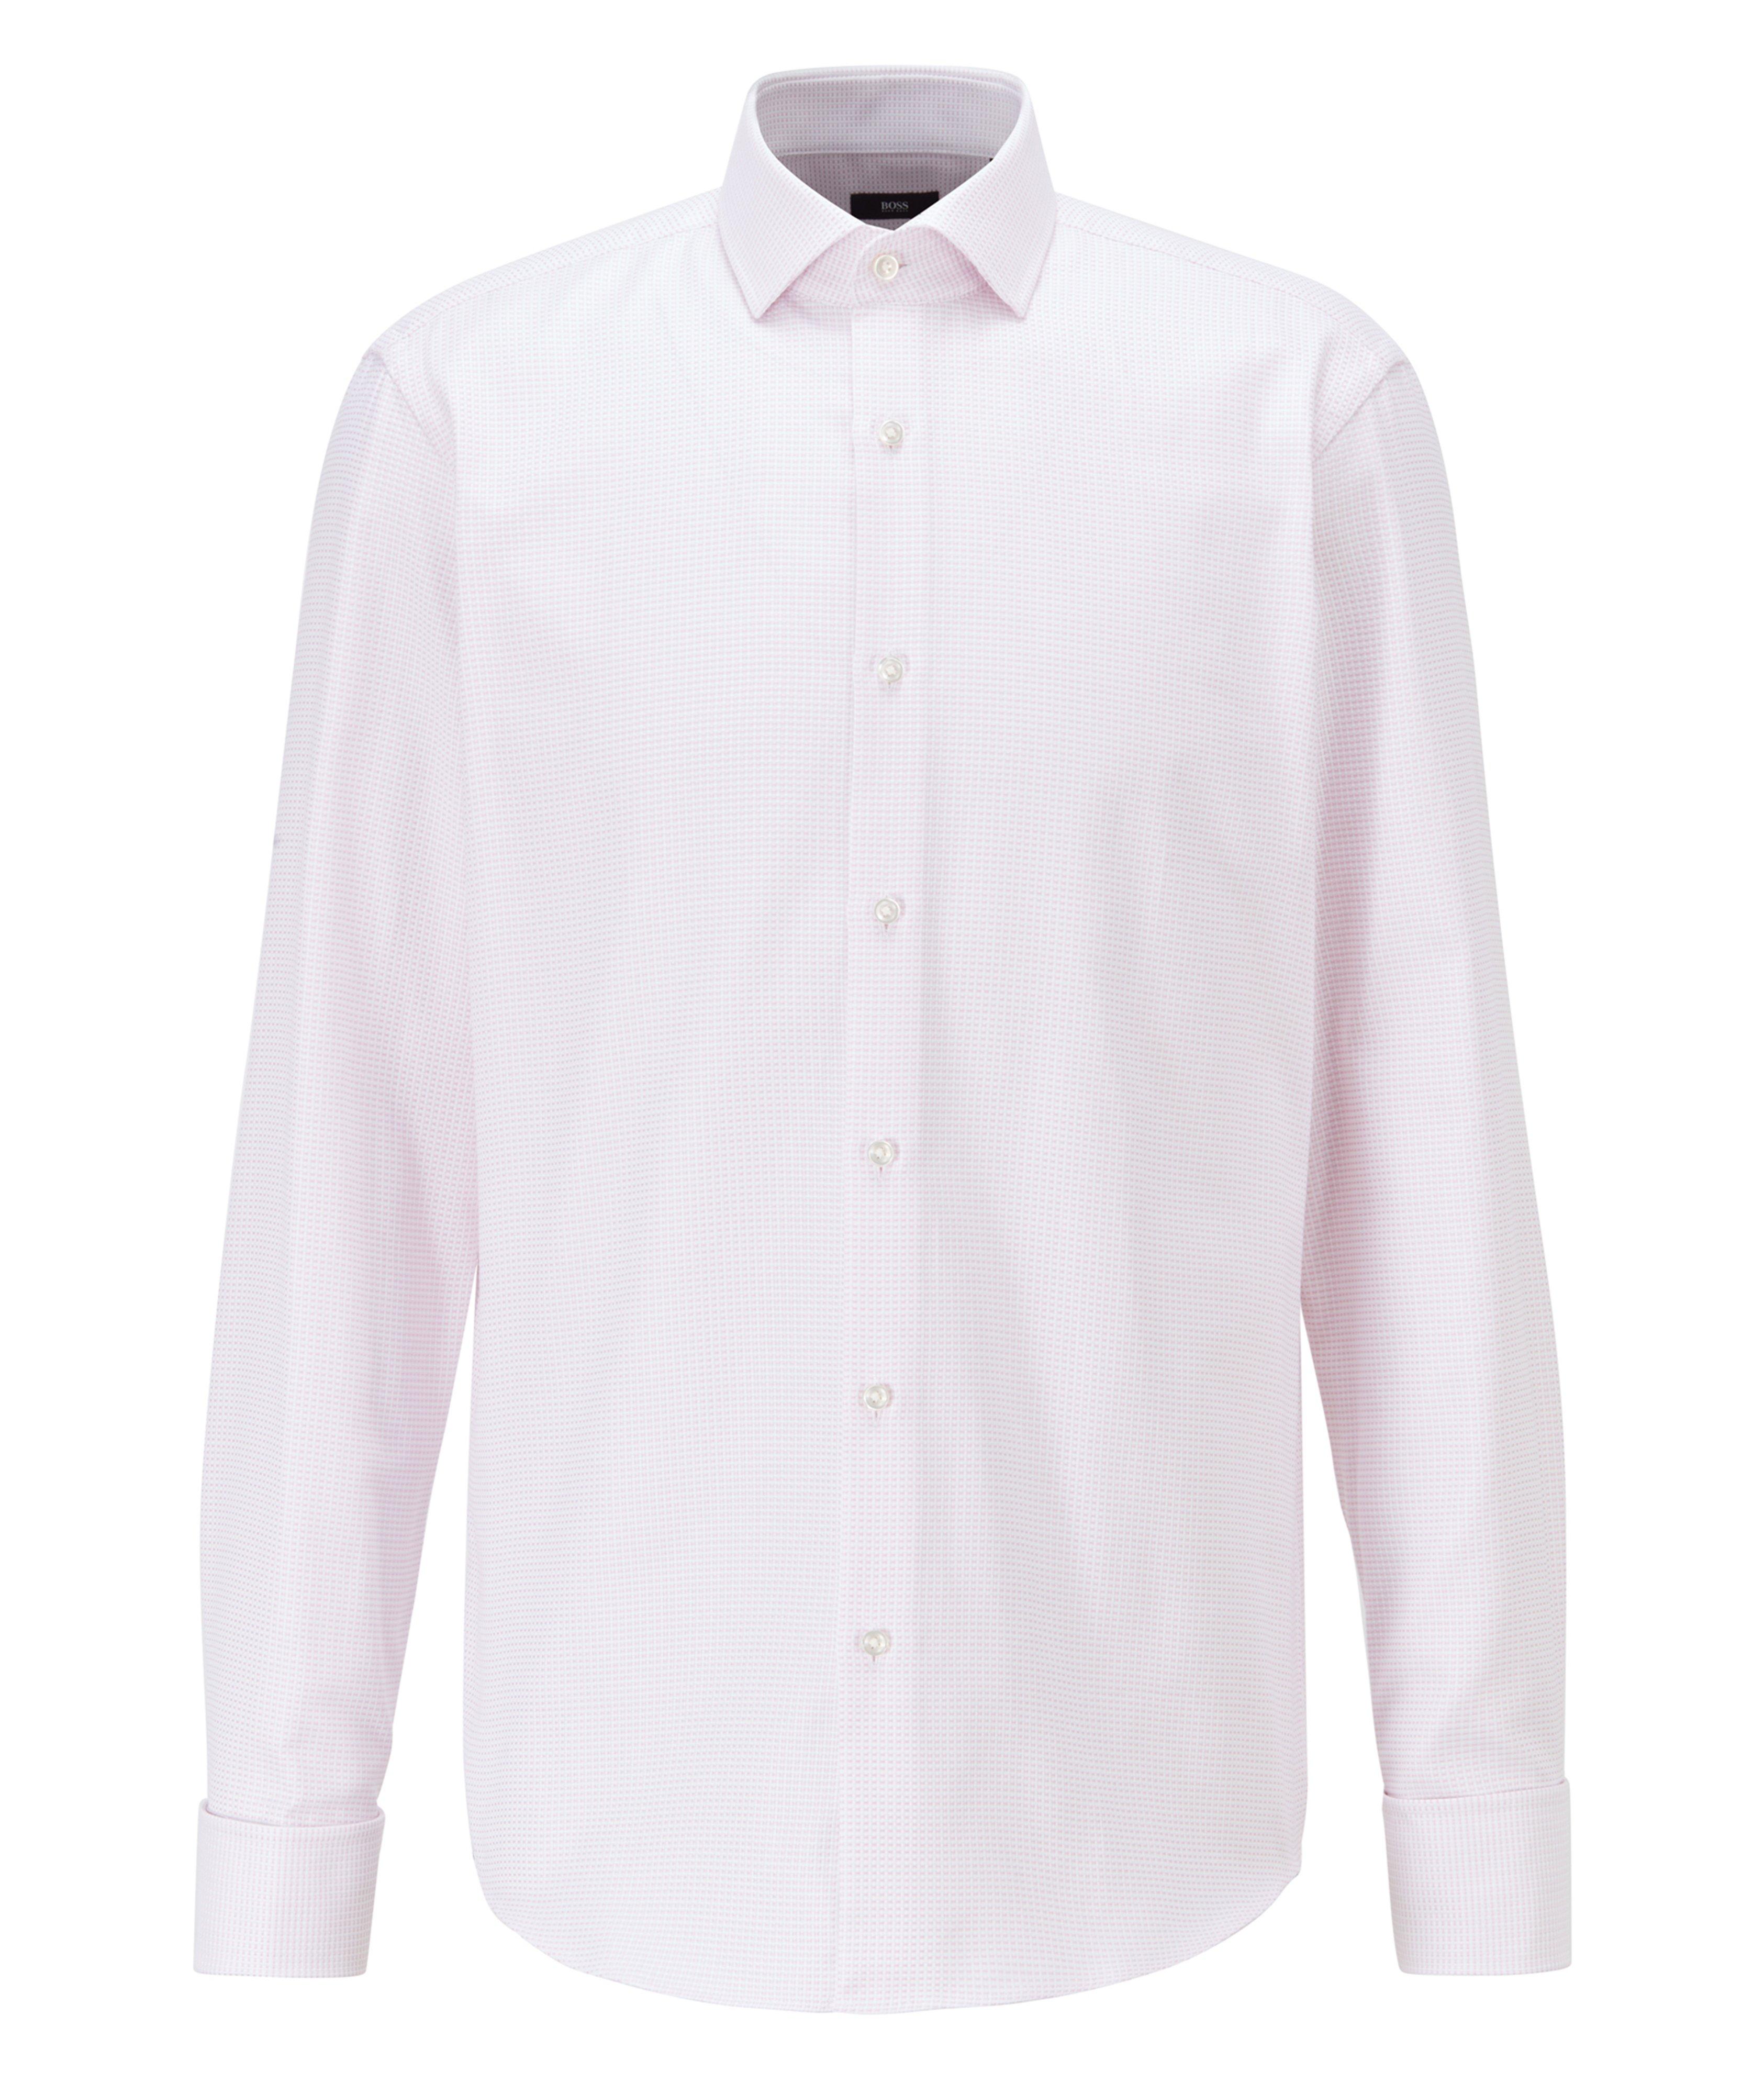 Contemporary Fit Microcheck Dress Shirt image 0